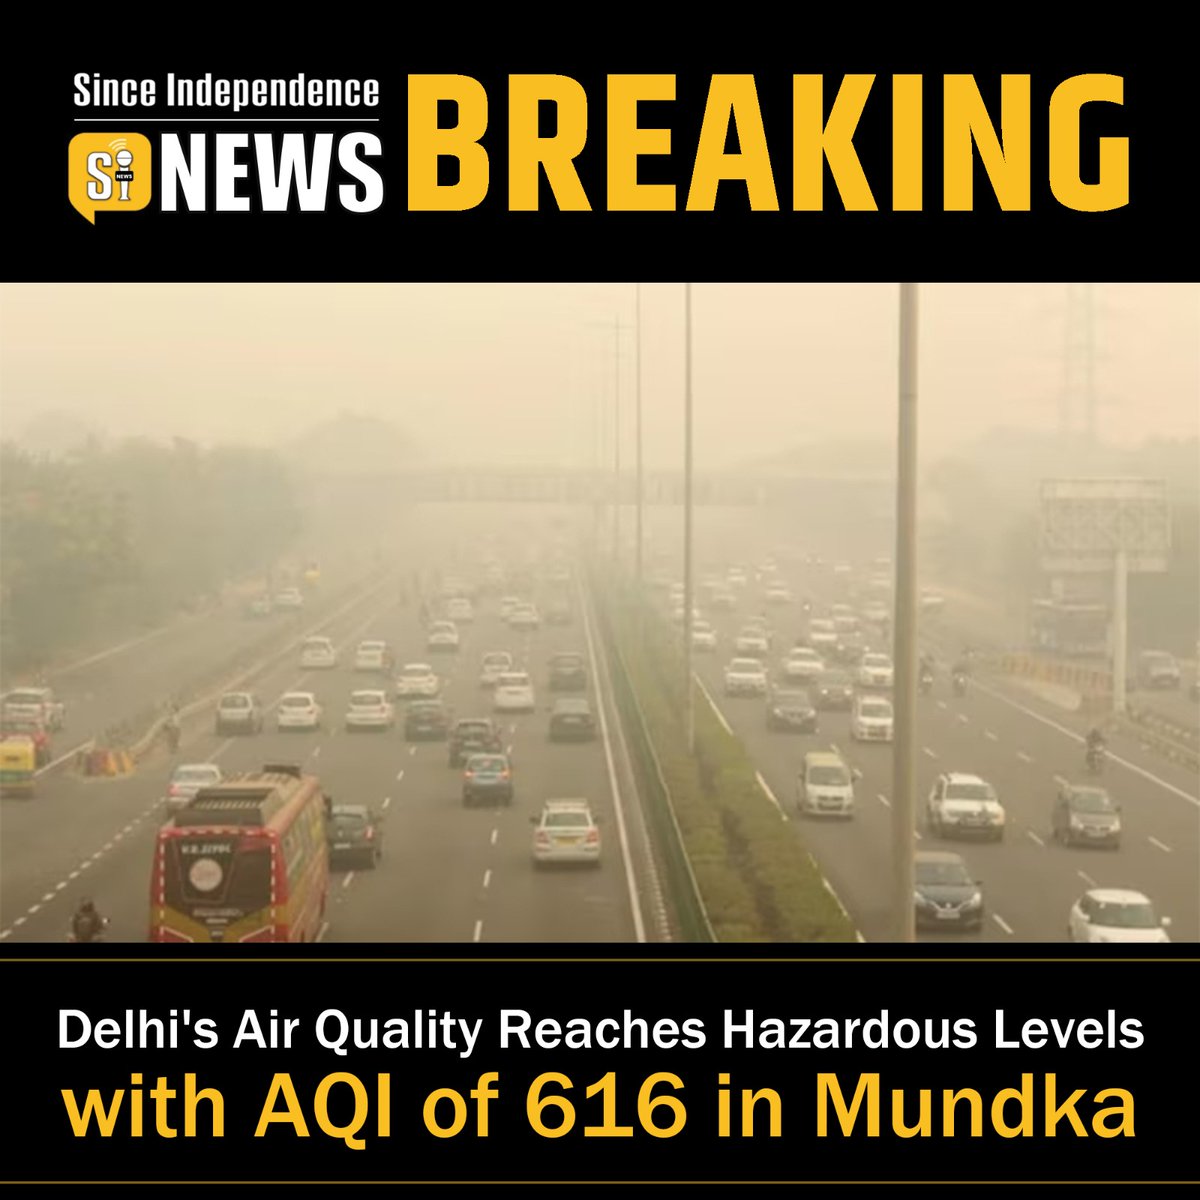 Delhi's Air Quality Reaches Hazardous Levels with AQI of 616 in Mundka I Since Indepence News
.
.
#Airpollutiondelhi #AapParty #AQI #delhi #winter #ArvindKejriwal #concerns #evenodd